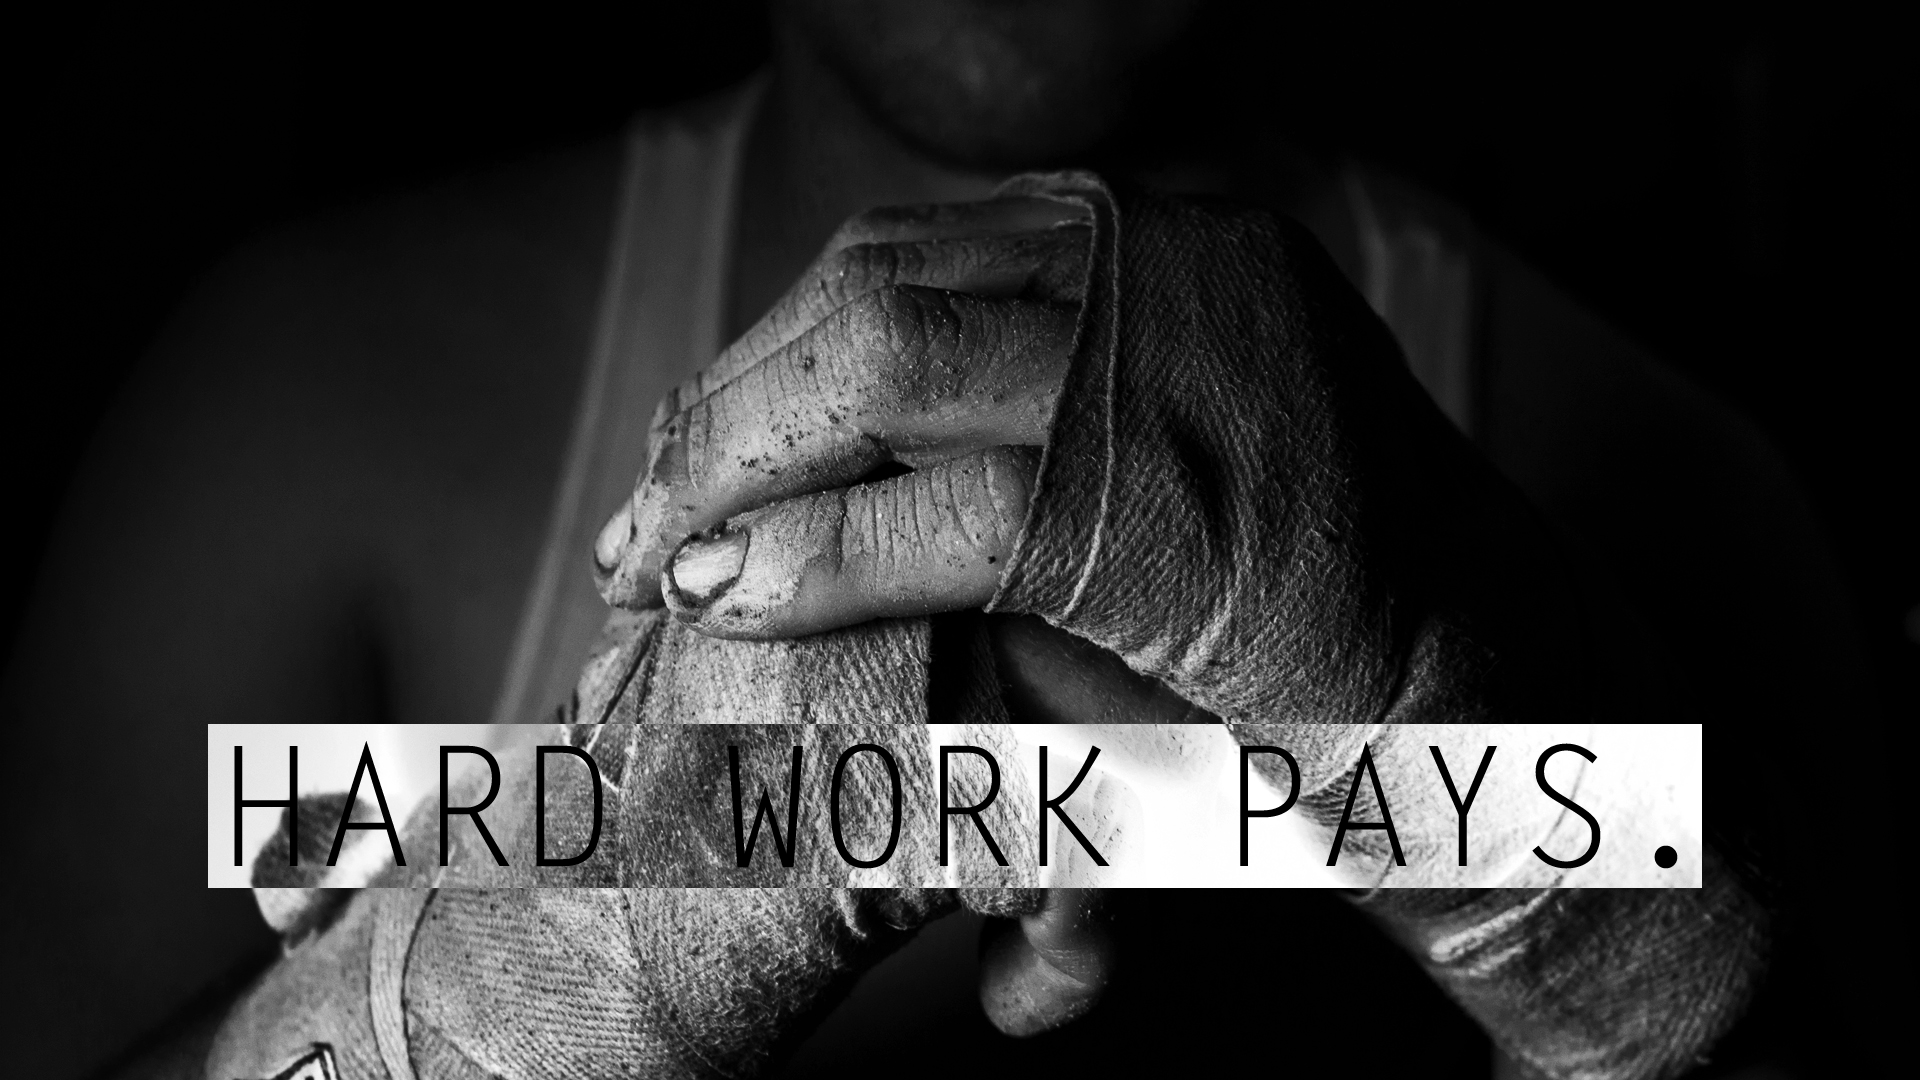 Working Out Gyms Motivational Boxing Monochrome Hands 1920x1080